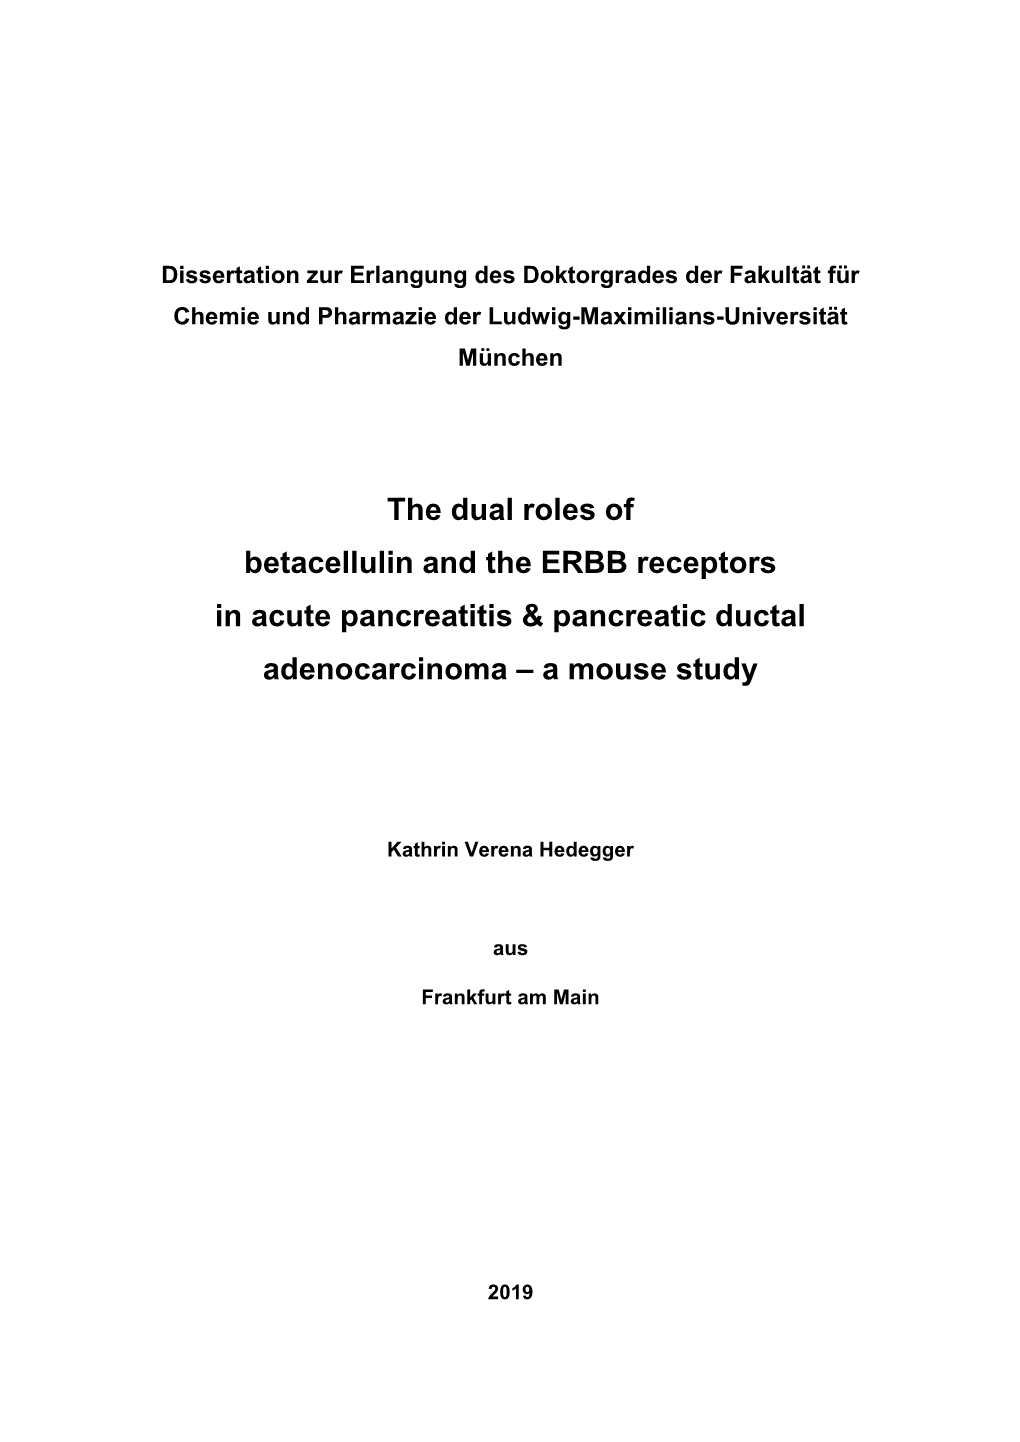 The Dual Roles of Betacellulin and the ERBB Receptors in Acute Pancreatitis & Pancreatic Ductal Adenocarcinoma – a Mouse Study